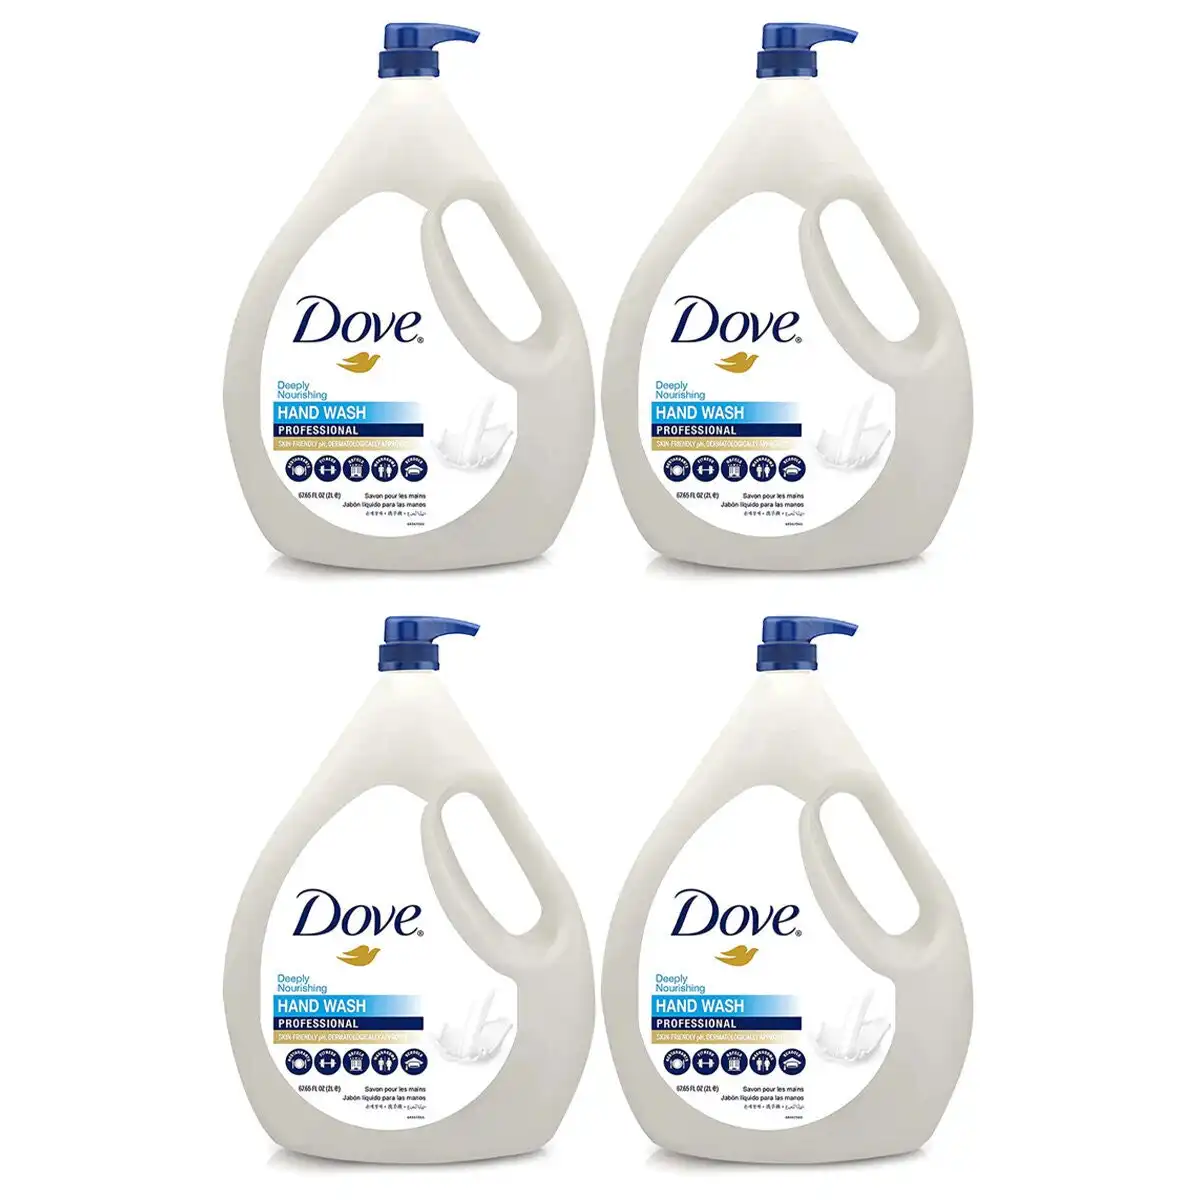 Dove 2L Deeply Nourishing Professional Hand Wash 4 Pack